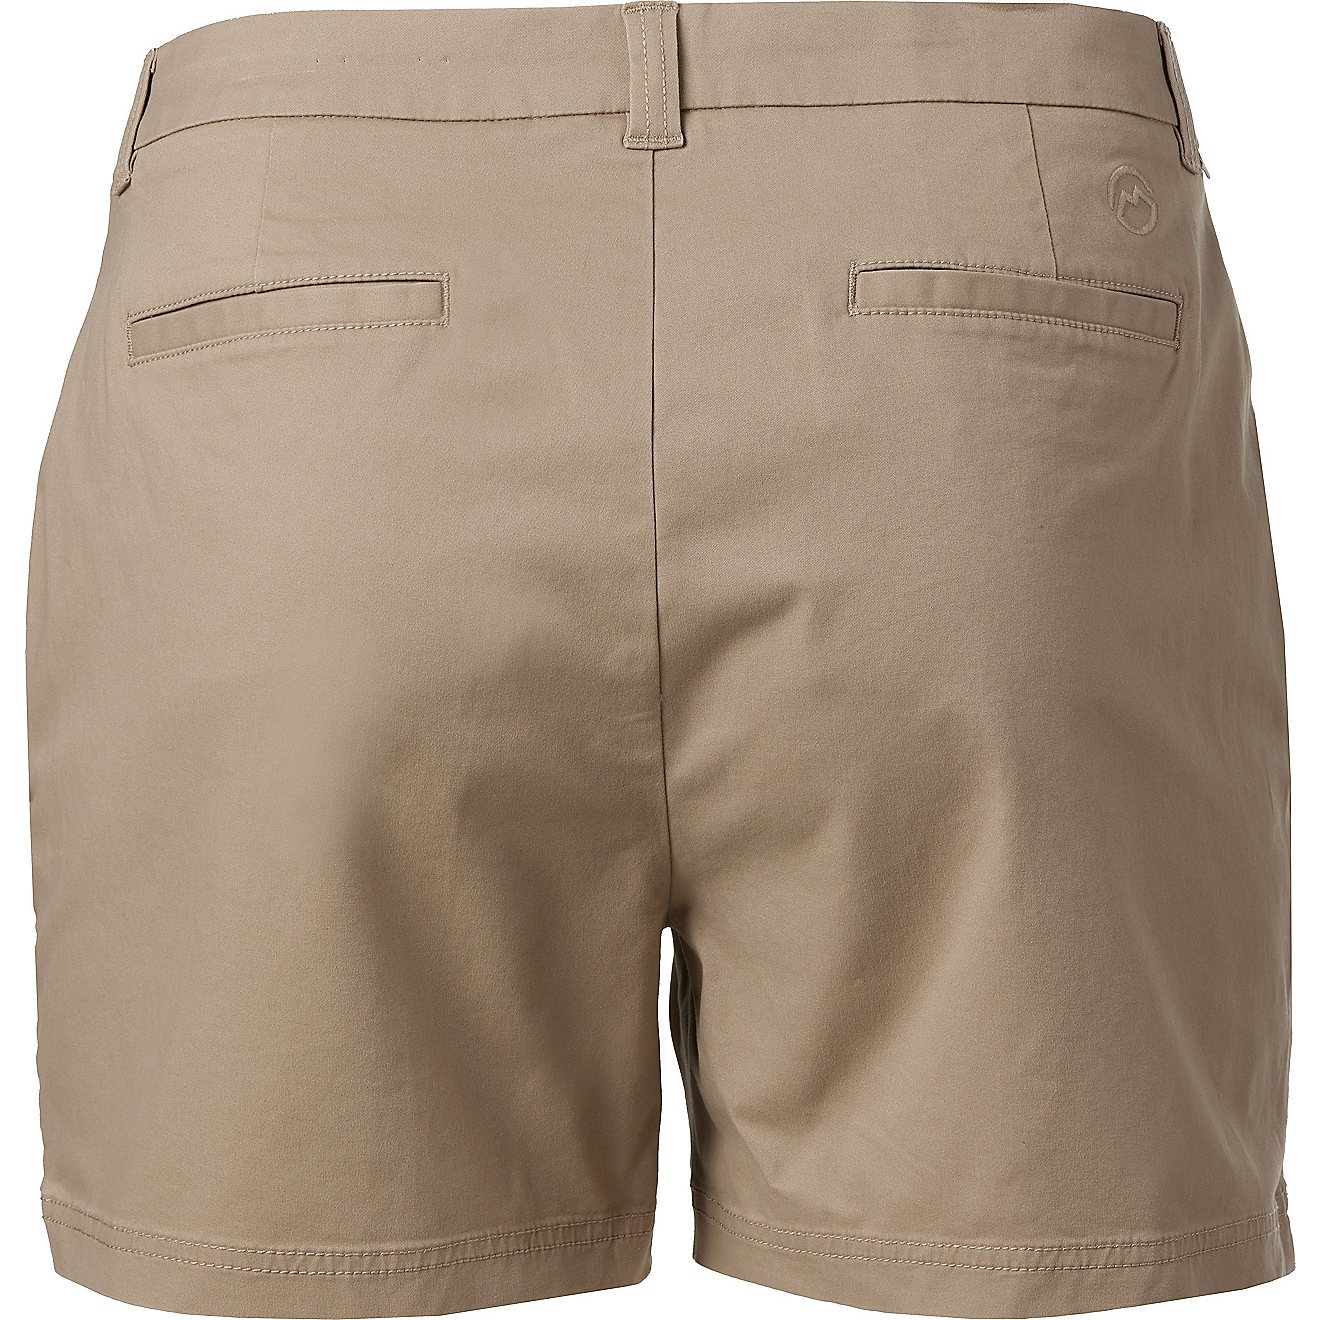 Magellan Outdoors Women's Plus Size Happy Camper Shorty Shorts                                                                   - view number 2